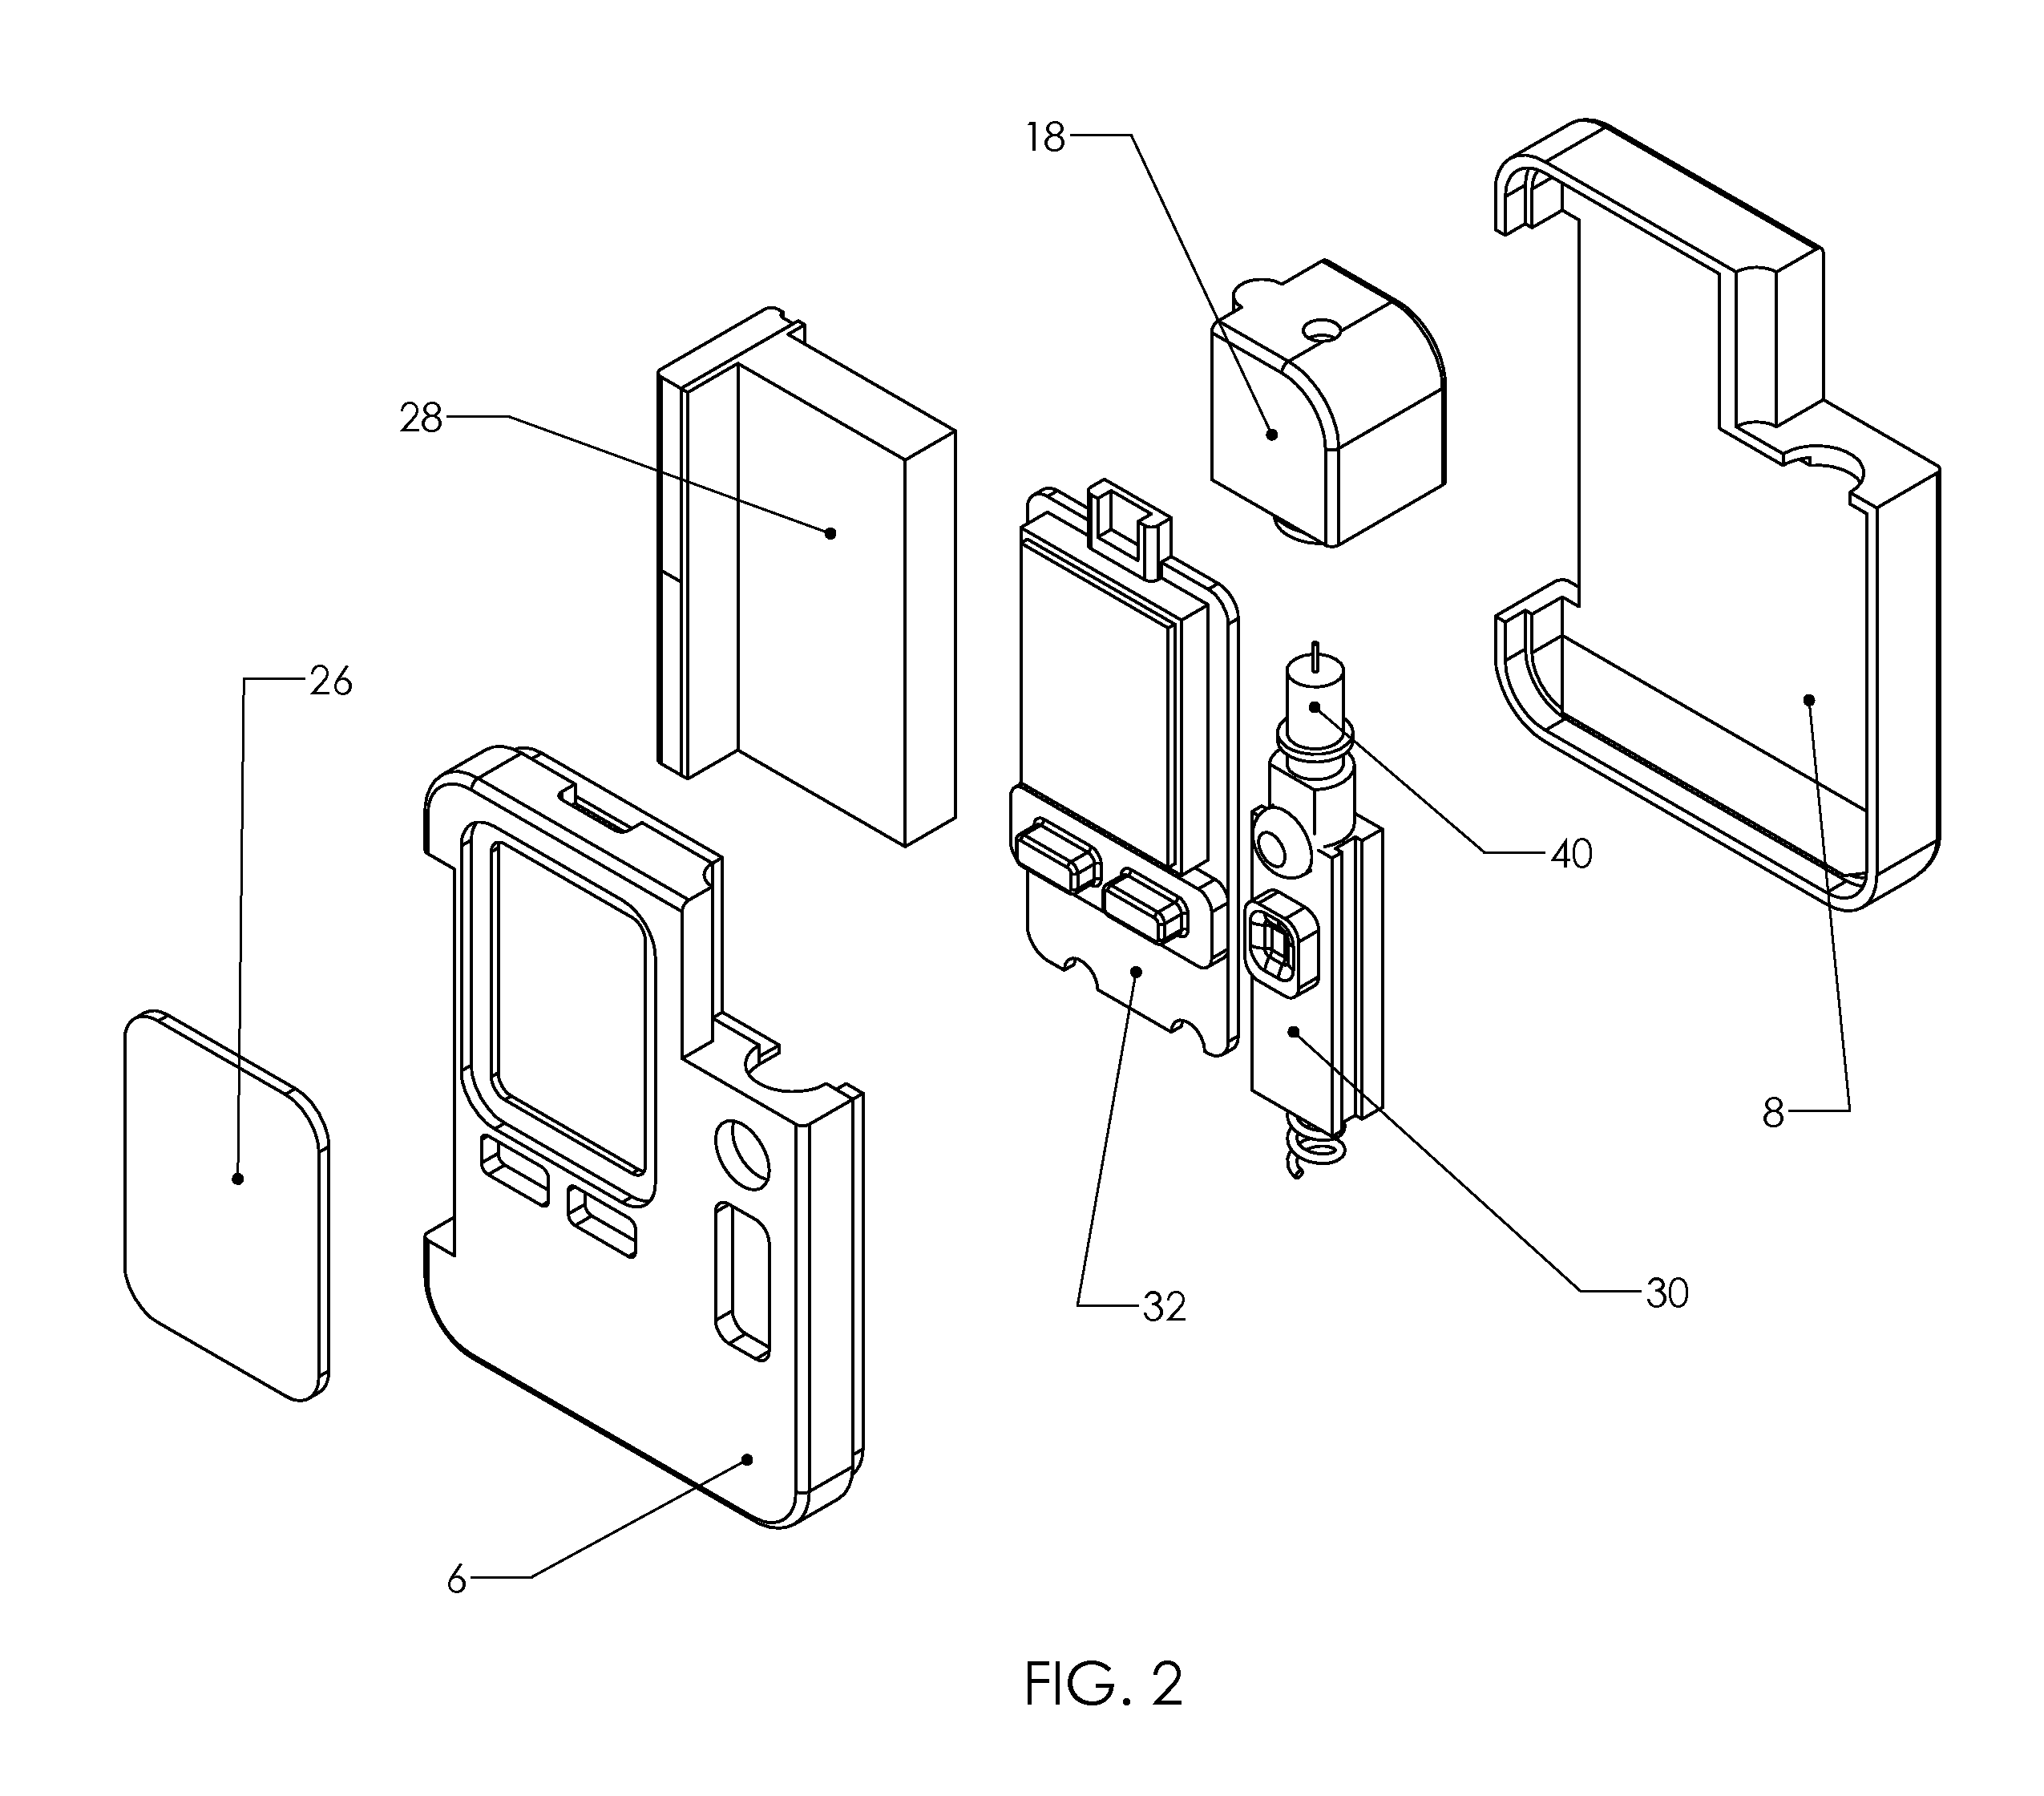 Self-contained blood glucose testing apparatus